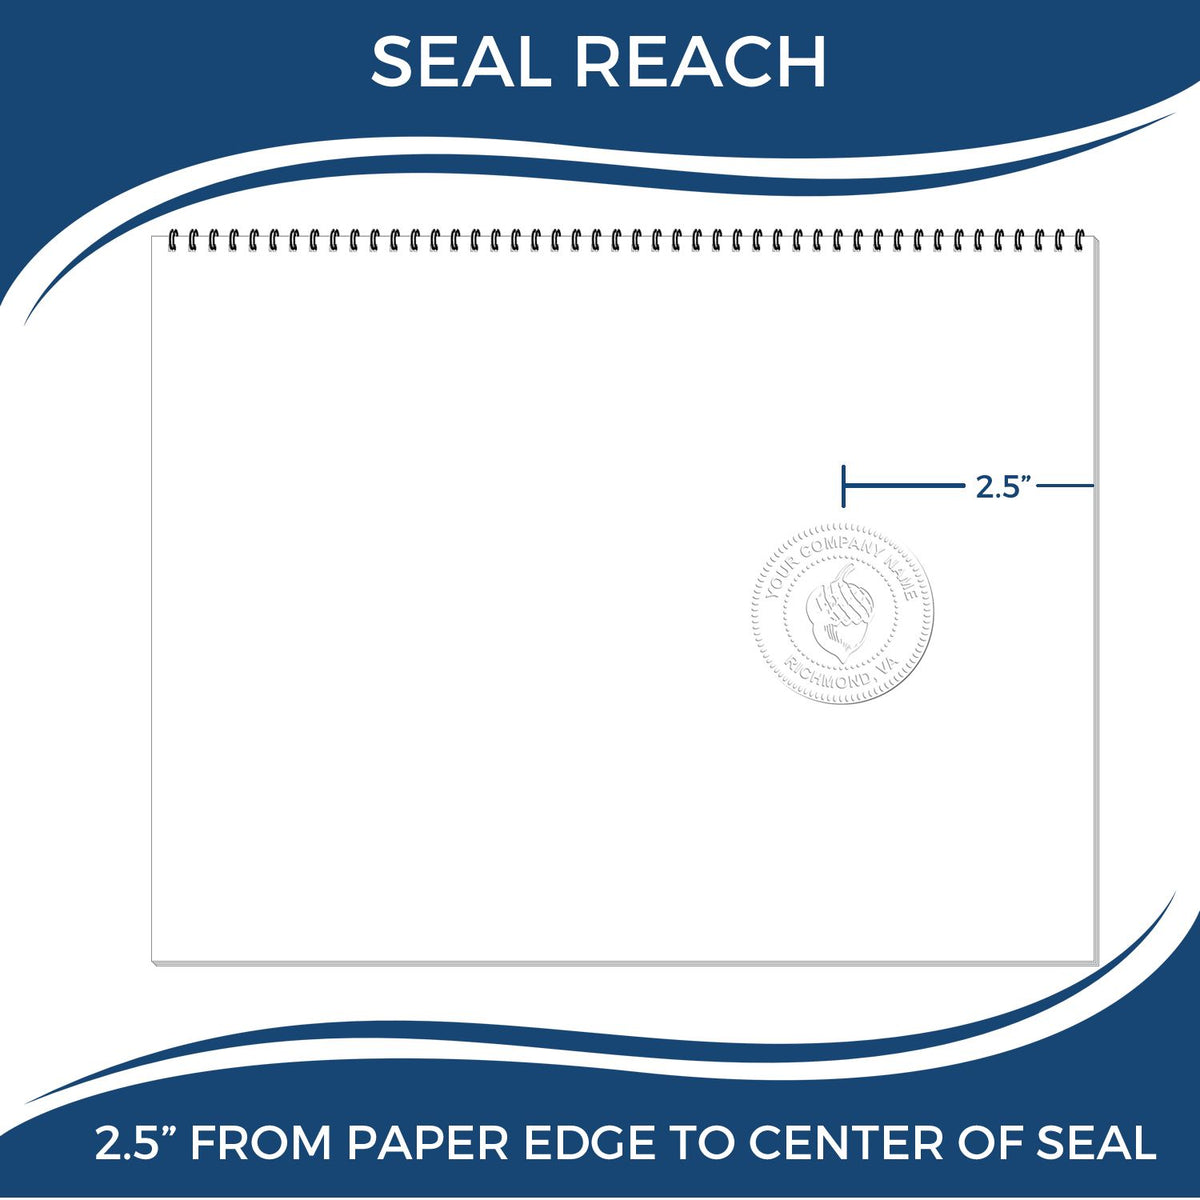 An infographic showing the seal reach which is represented by a ruler and a miniature seal image of the Long Reach Georgia PE Seal